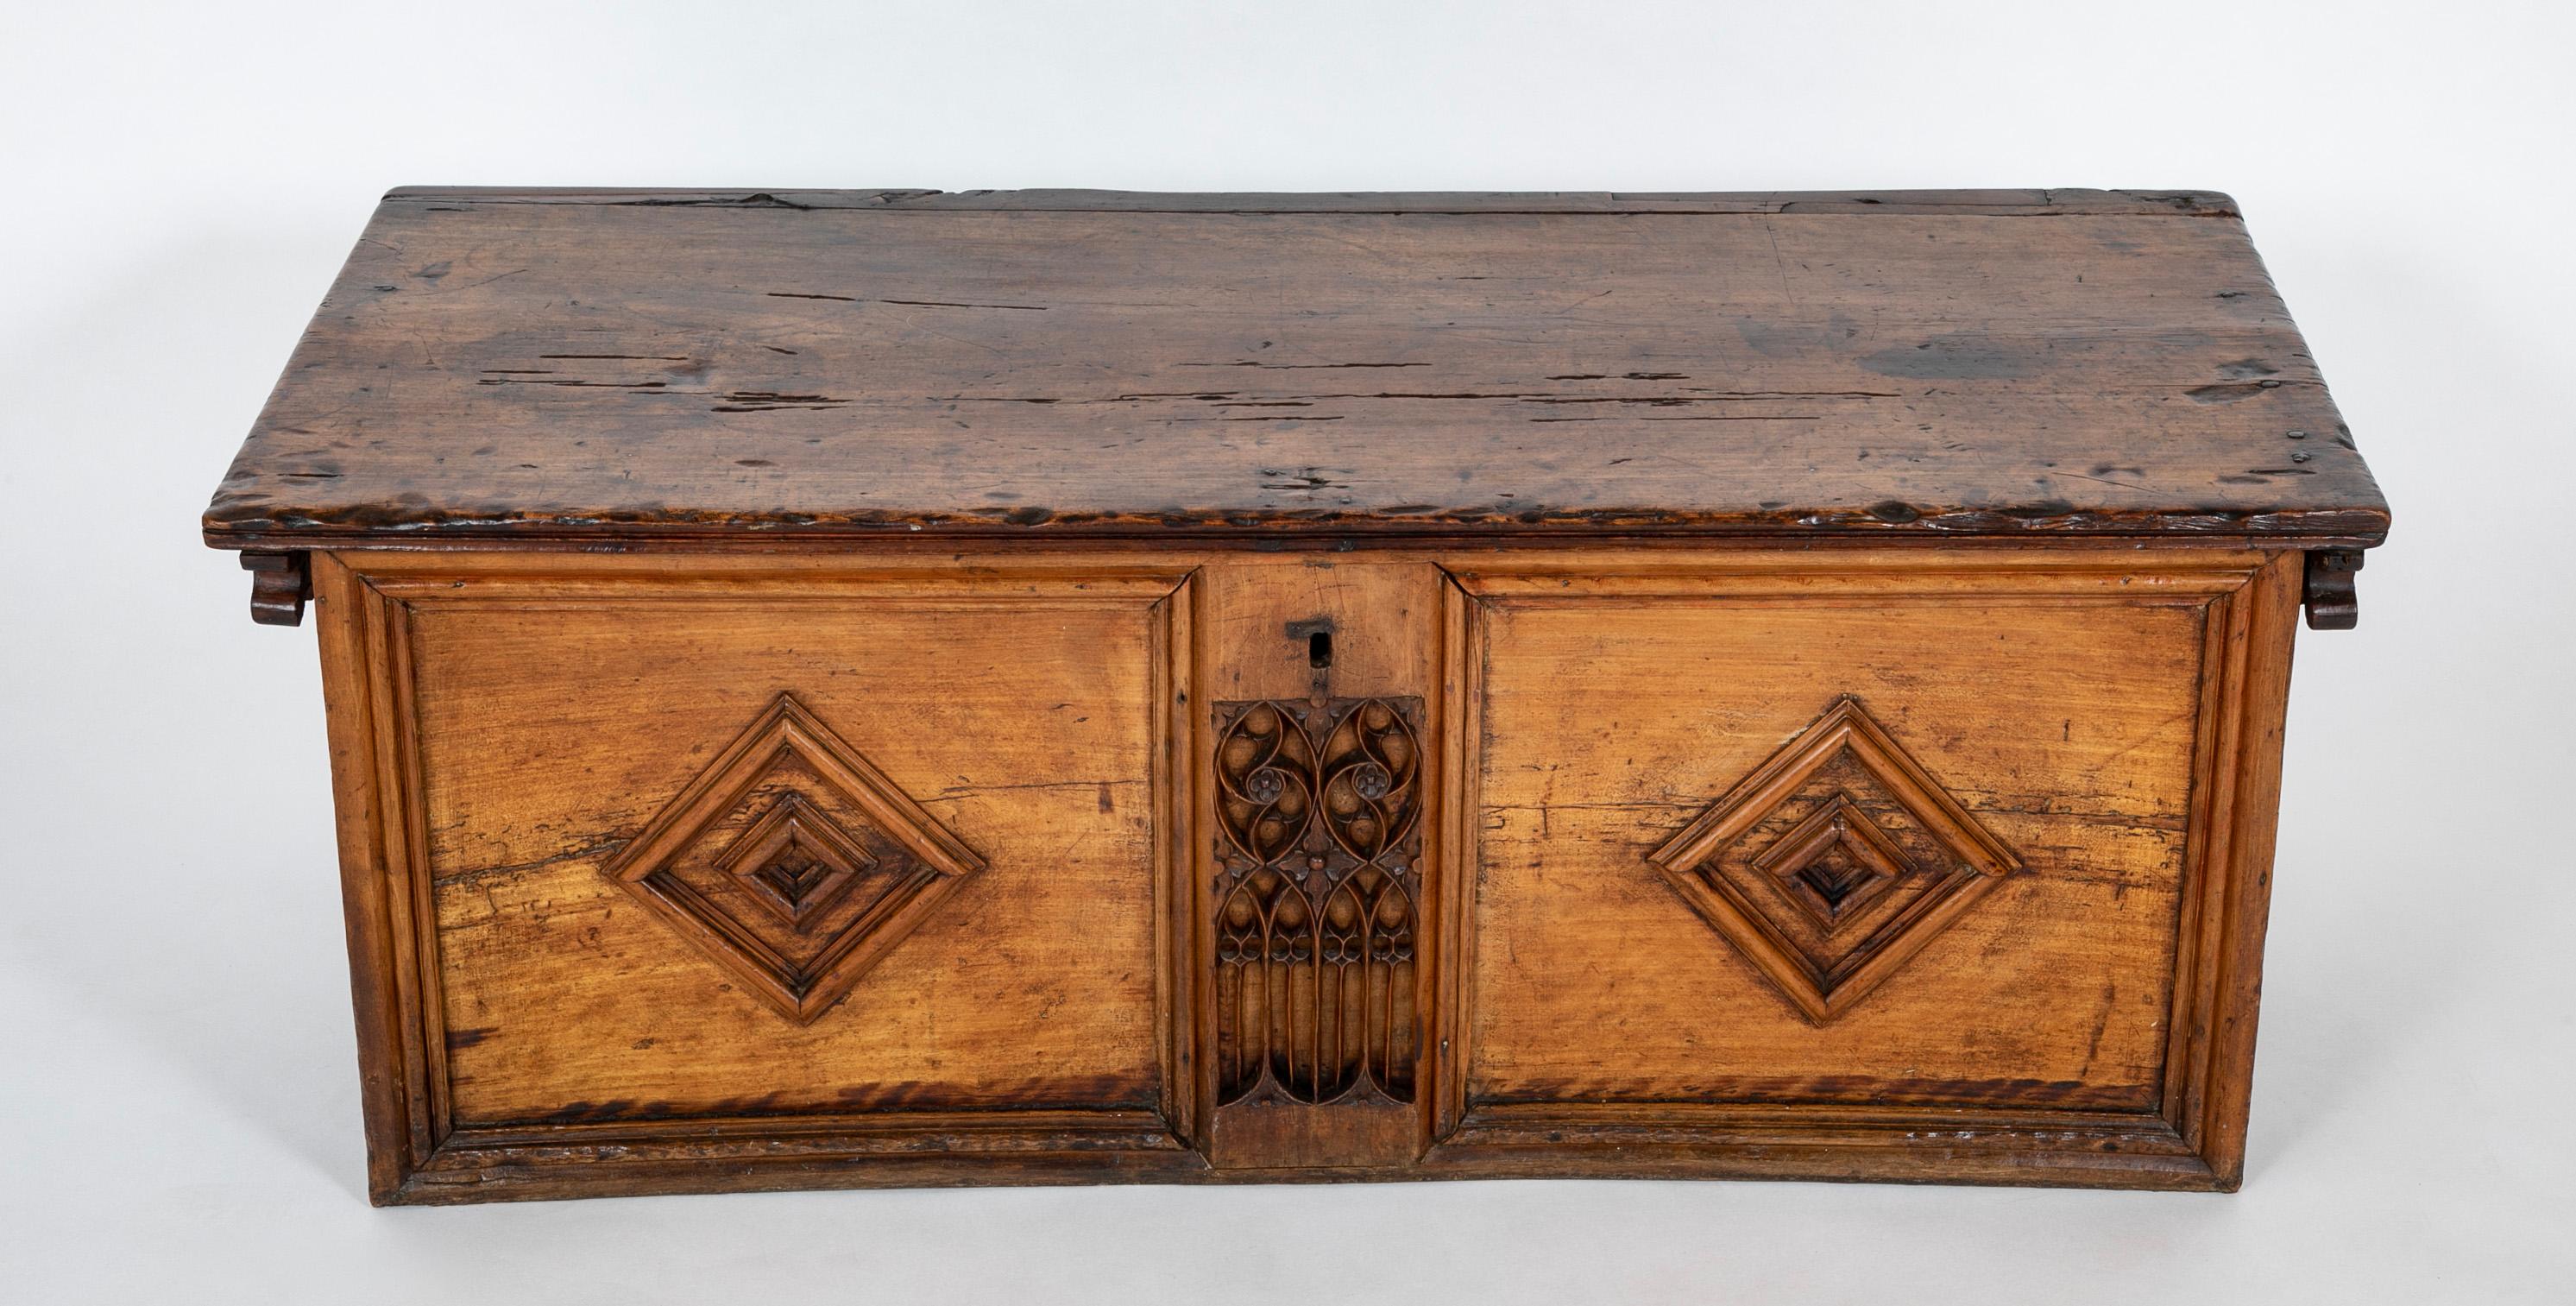 A wonderful early walnut chest, French 16th century, with a central panel of Gothic tracery. The only other decoration are simple raised molding square diamonds one the front and sides. I love the simplicity of this piece, showing the transition